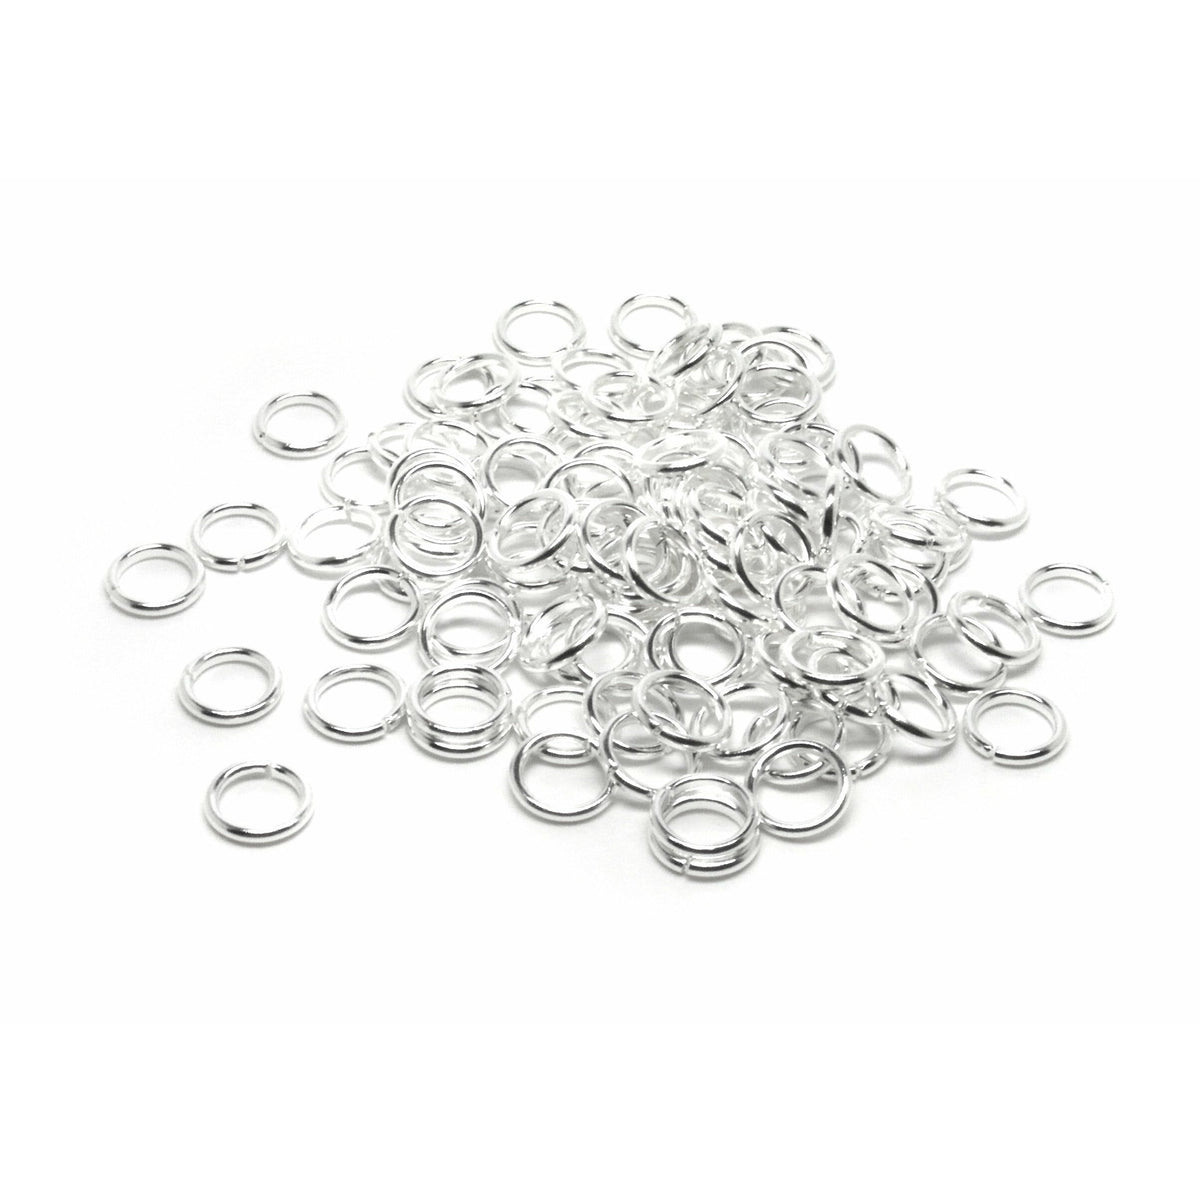 hildie & Jo 5mm Sterling Silver Plated Jump Rings 40pk - Jump Rings - Beads & Jewelry Making